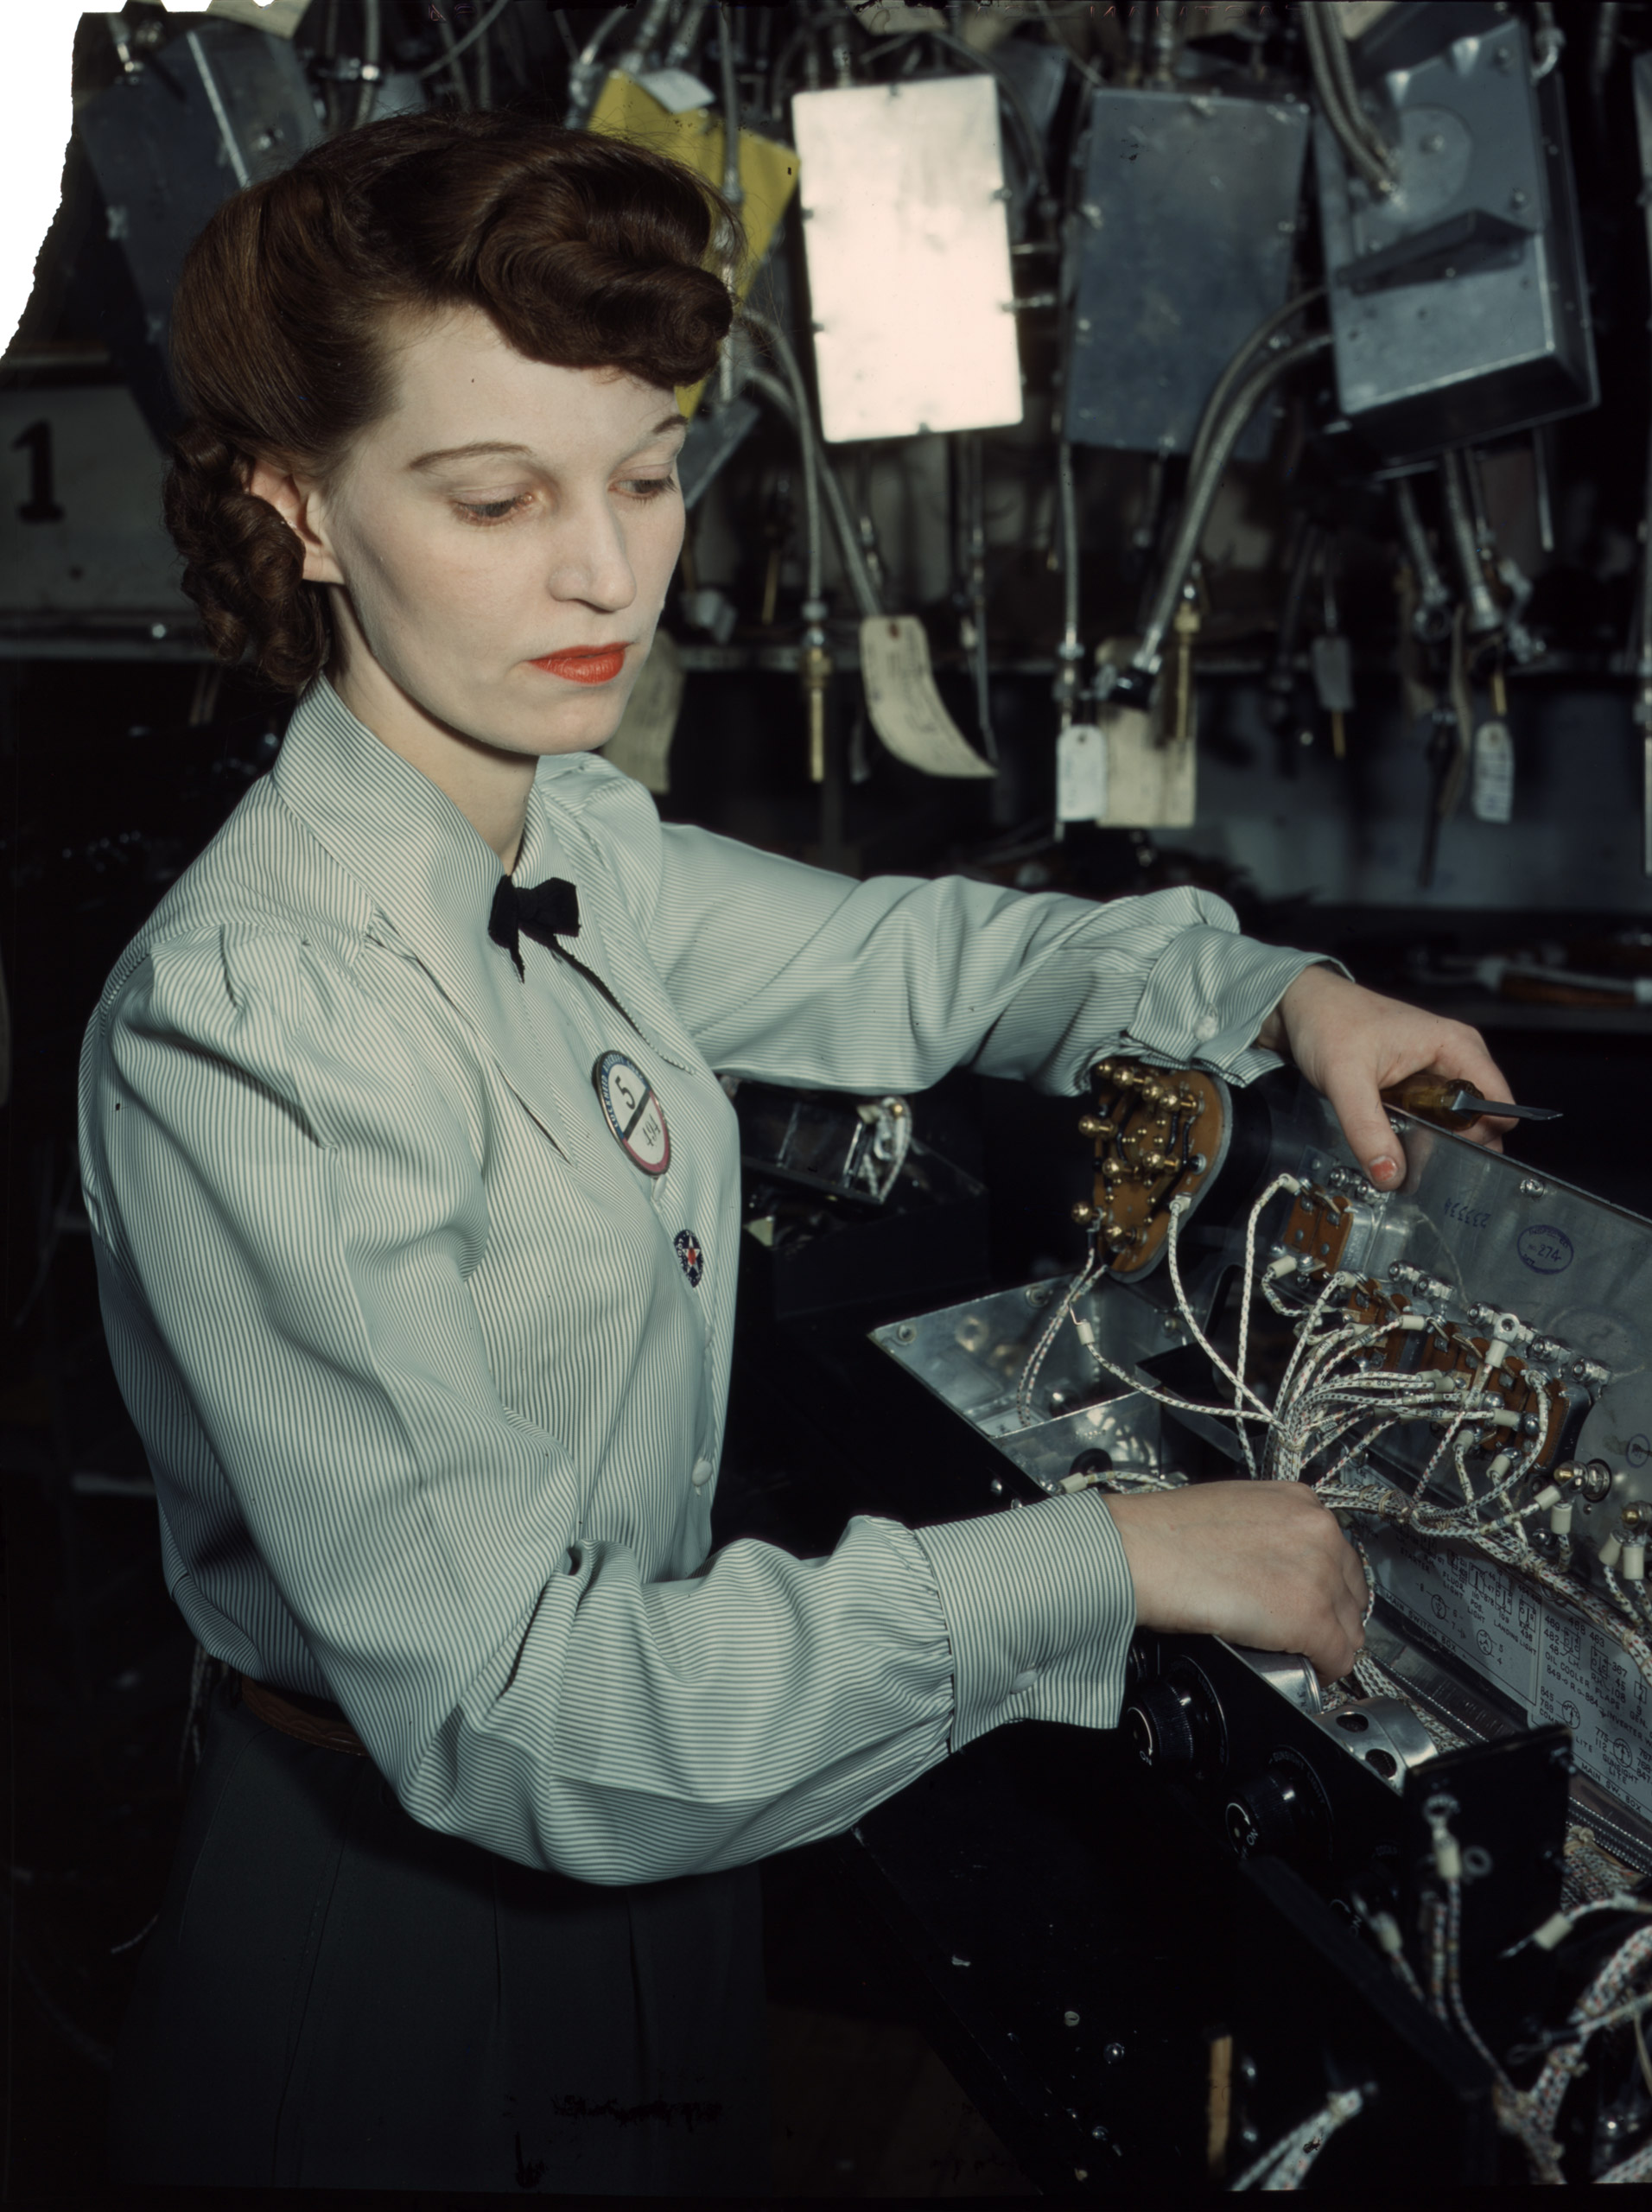 Electronics technician, Goodyear Aircraft Corp., Akron, Ohio, December 1941. Photographed by Alfred T. Palmer for the Farm Security Administration.